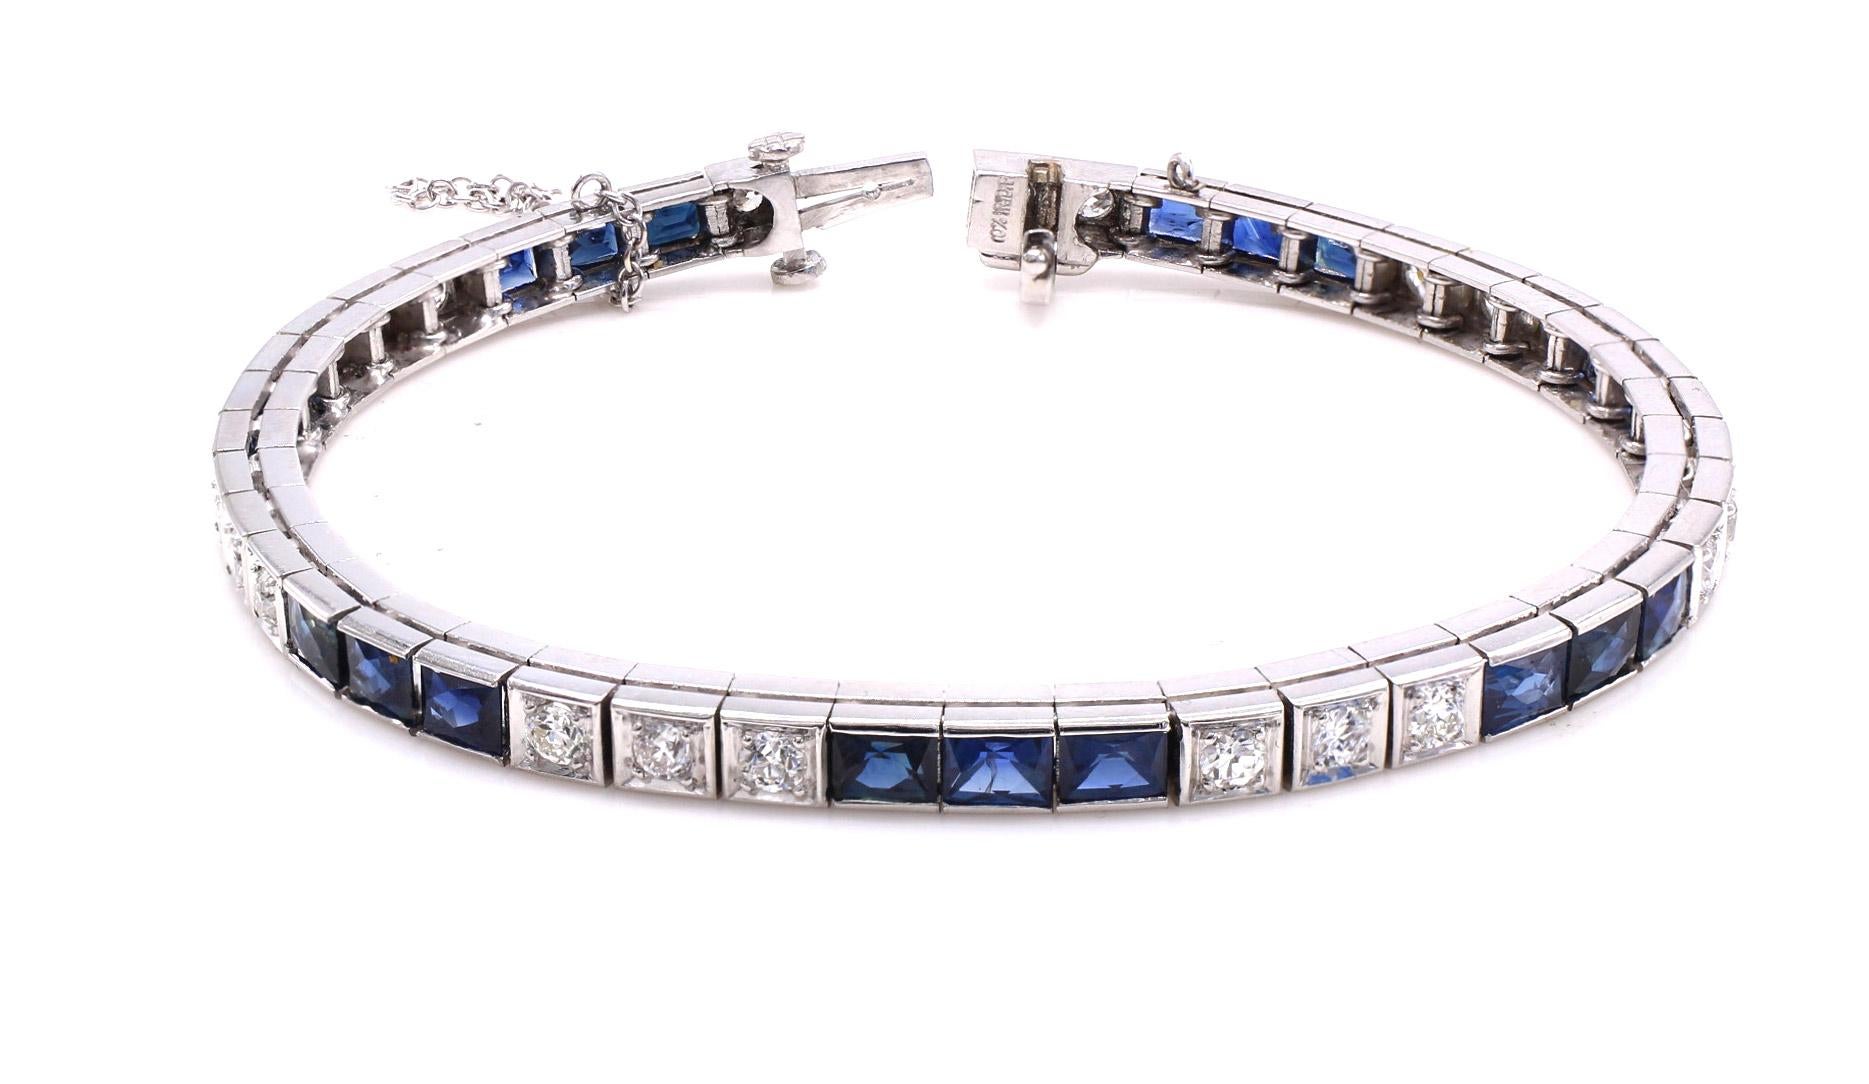 Magnificently handcrafted in platinum, this Art Deco straight line bracelet - or today known as tennis bracelet is mint condition, seemingly having been rarely worn. Alternating sections of perfectly matched bright white and lively Old European cut